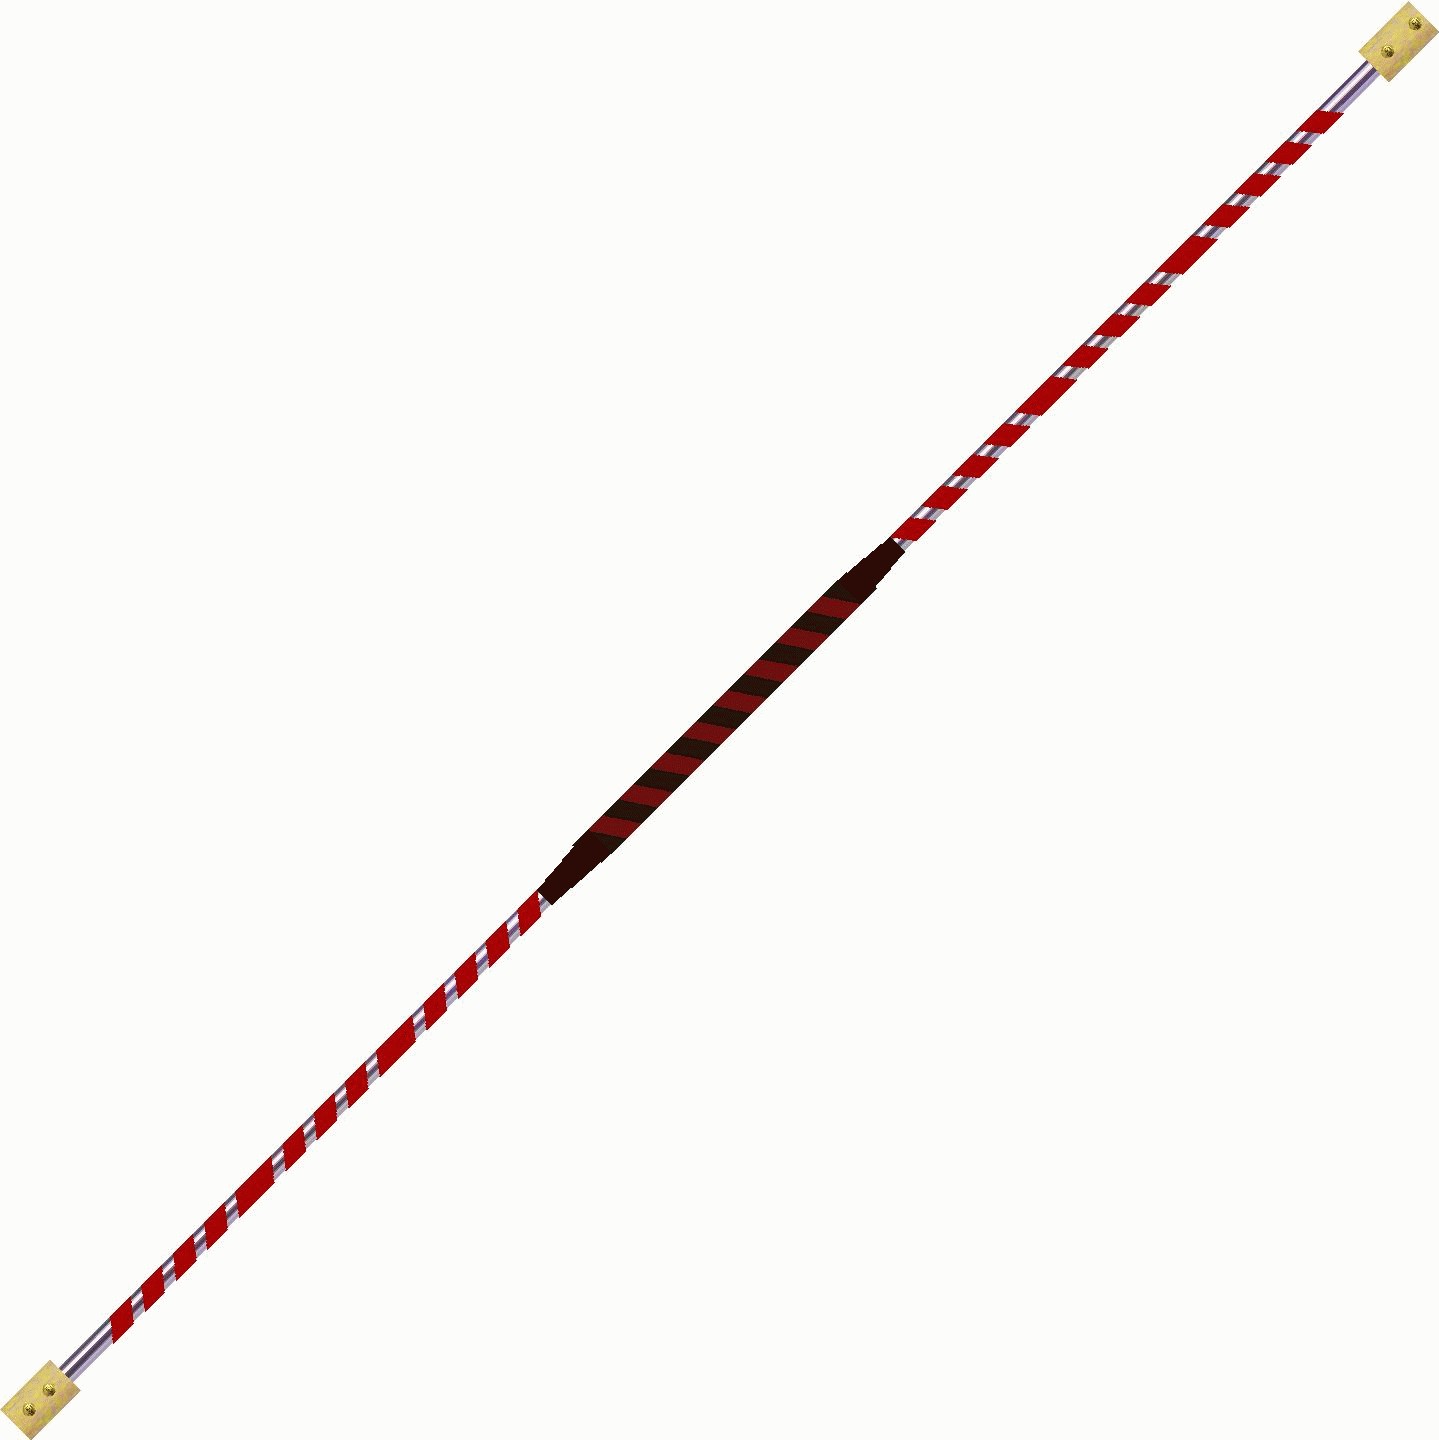 Contact Fire Staff  180cm  65mm Kevlar    Black Red   